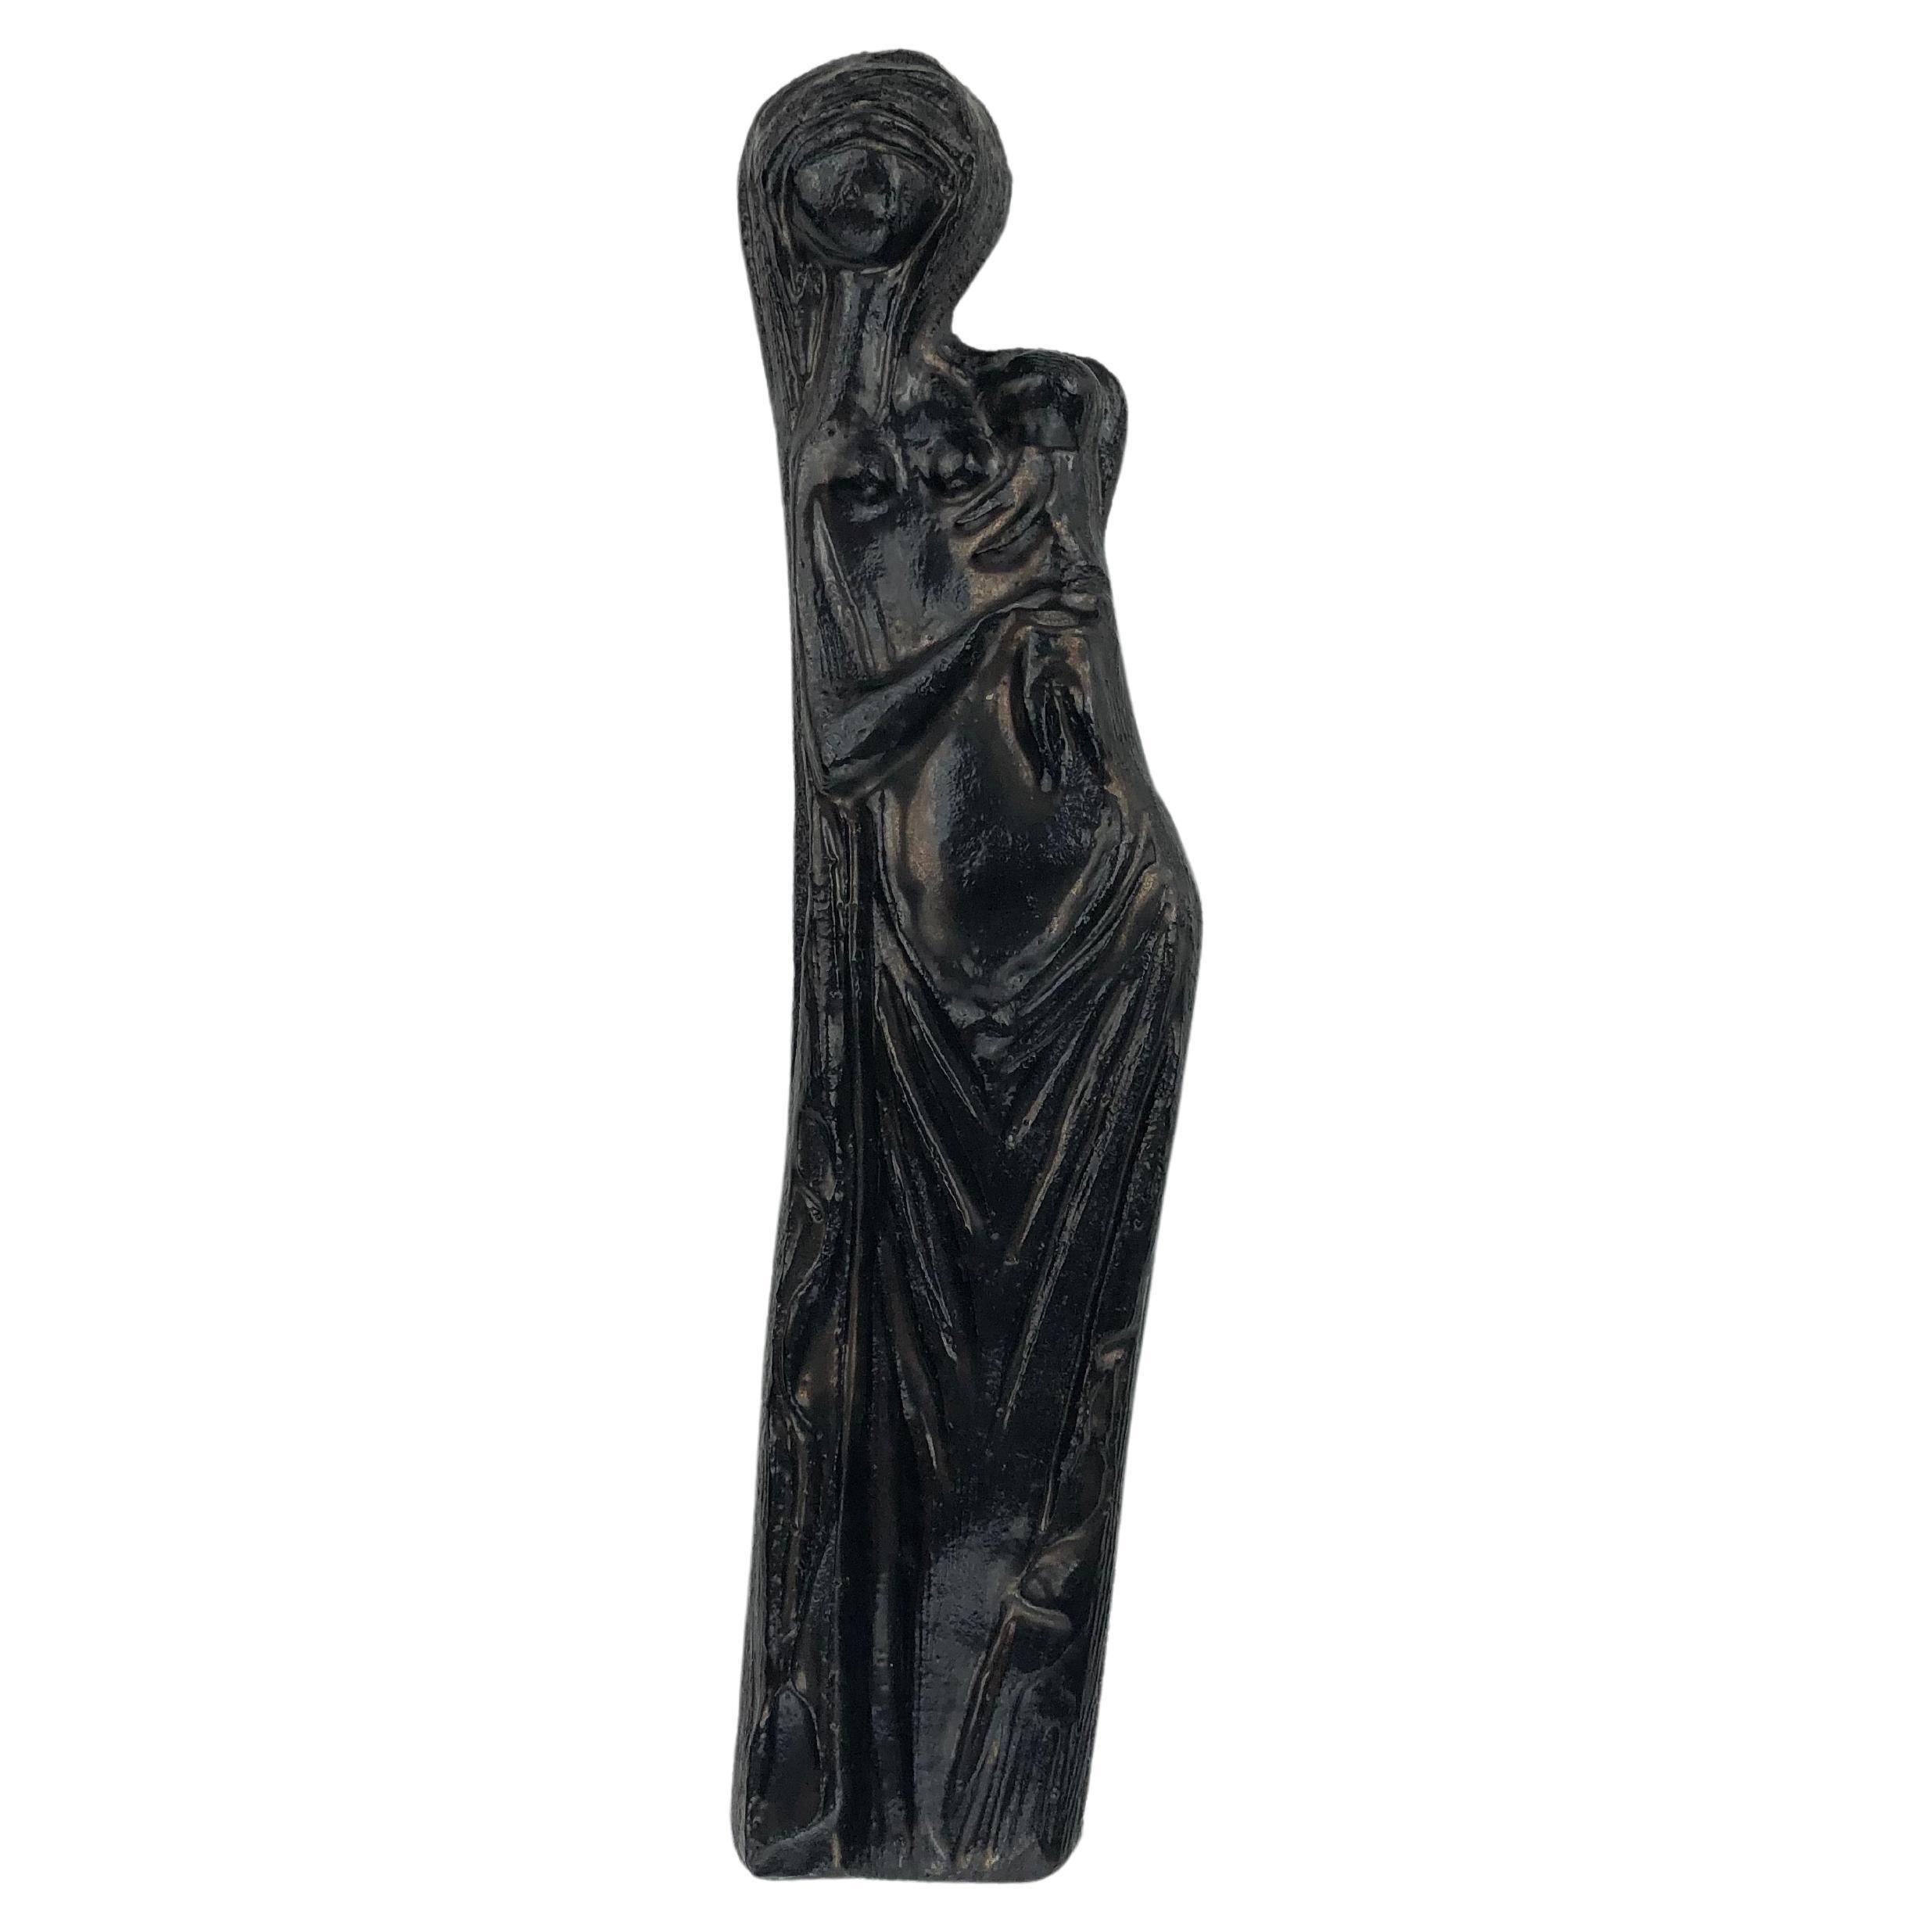 A black ceramic Virgin Mary embellished with subtle iridescent brown hues, this ceramic cross has a captivating blend of earthy warmth and modernist design. The sheen of the matte glaze and the subtile facial expressions add an other-worldly